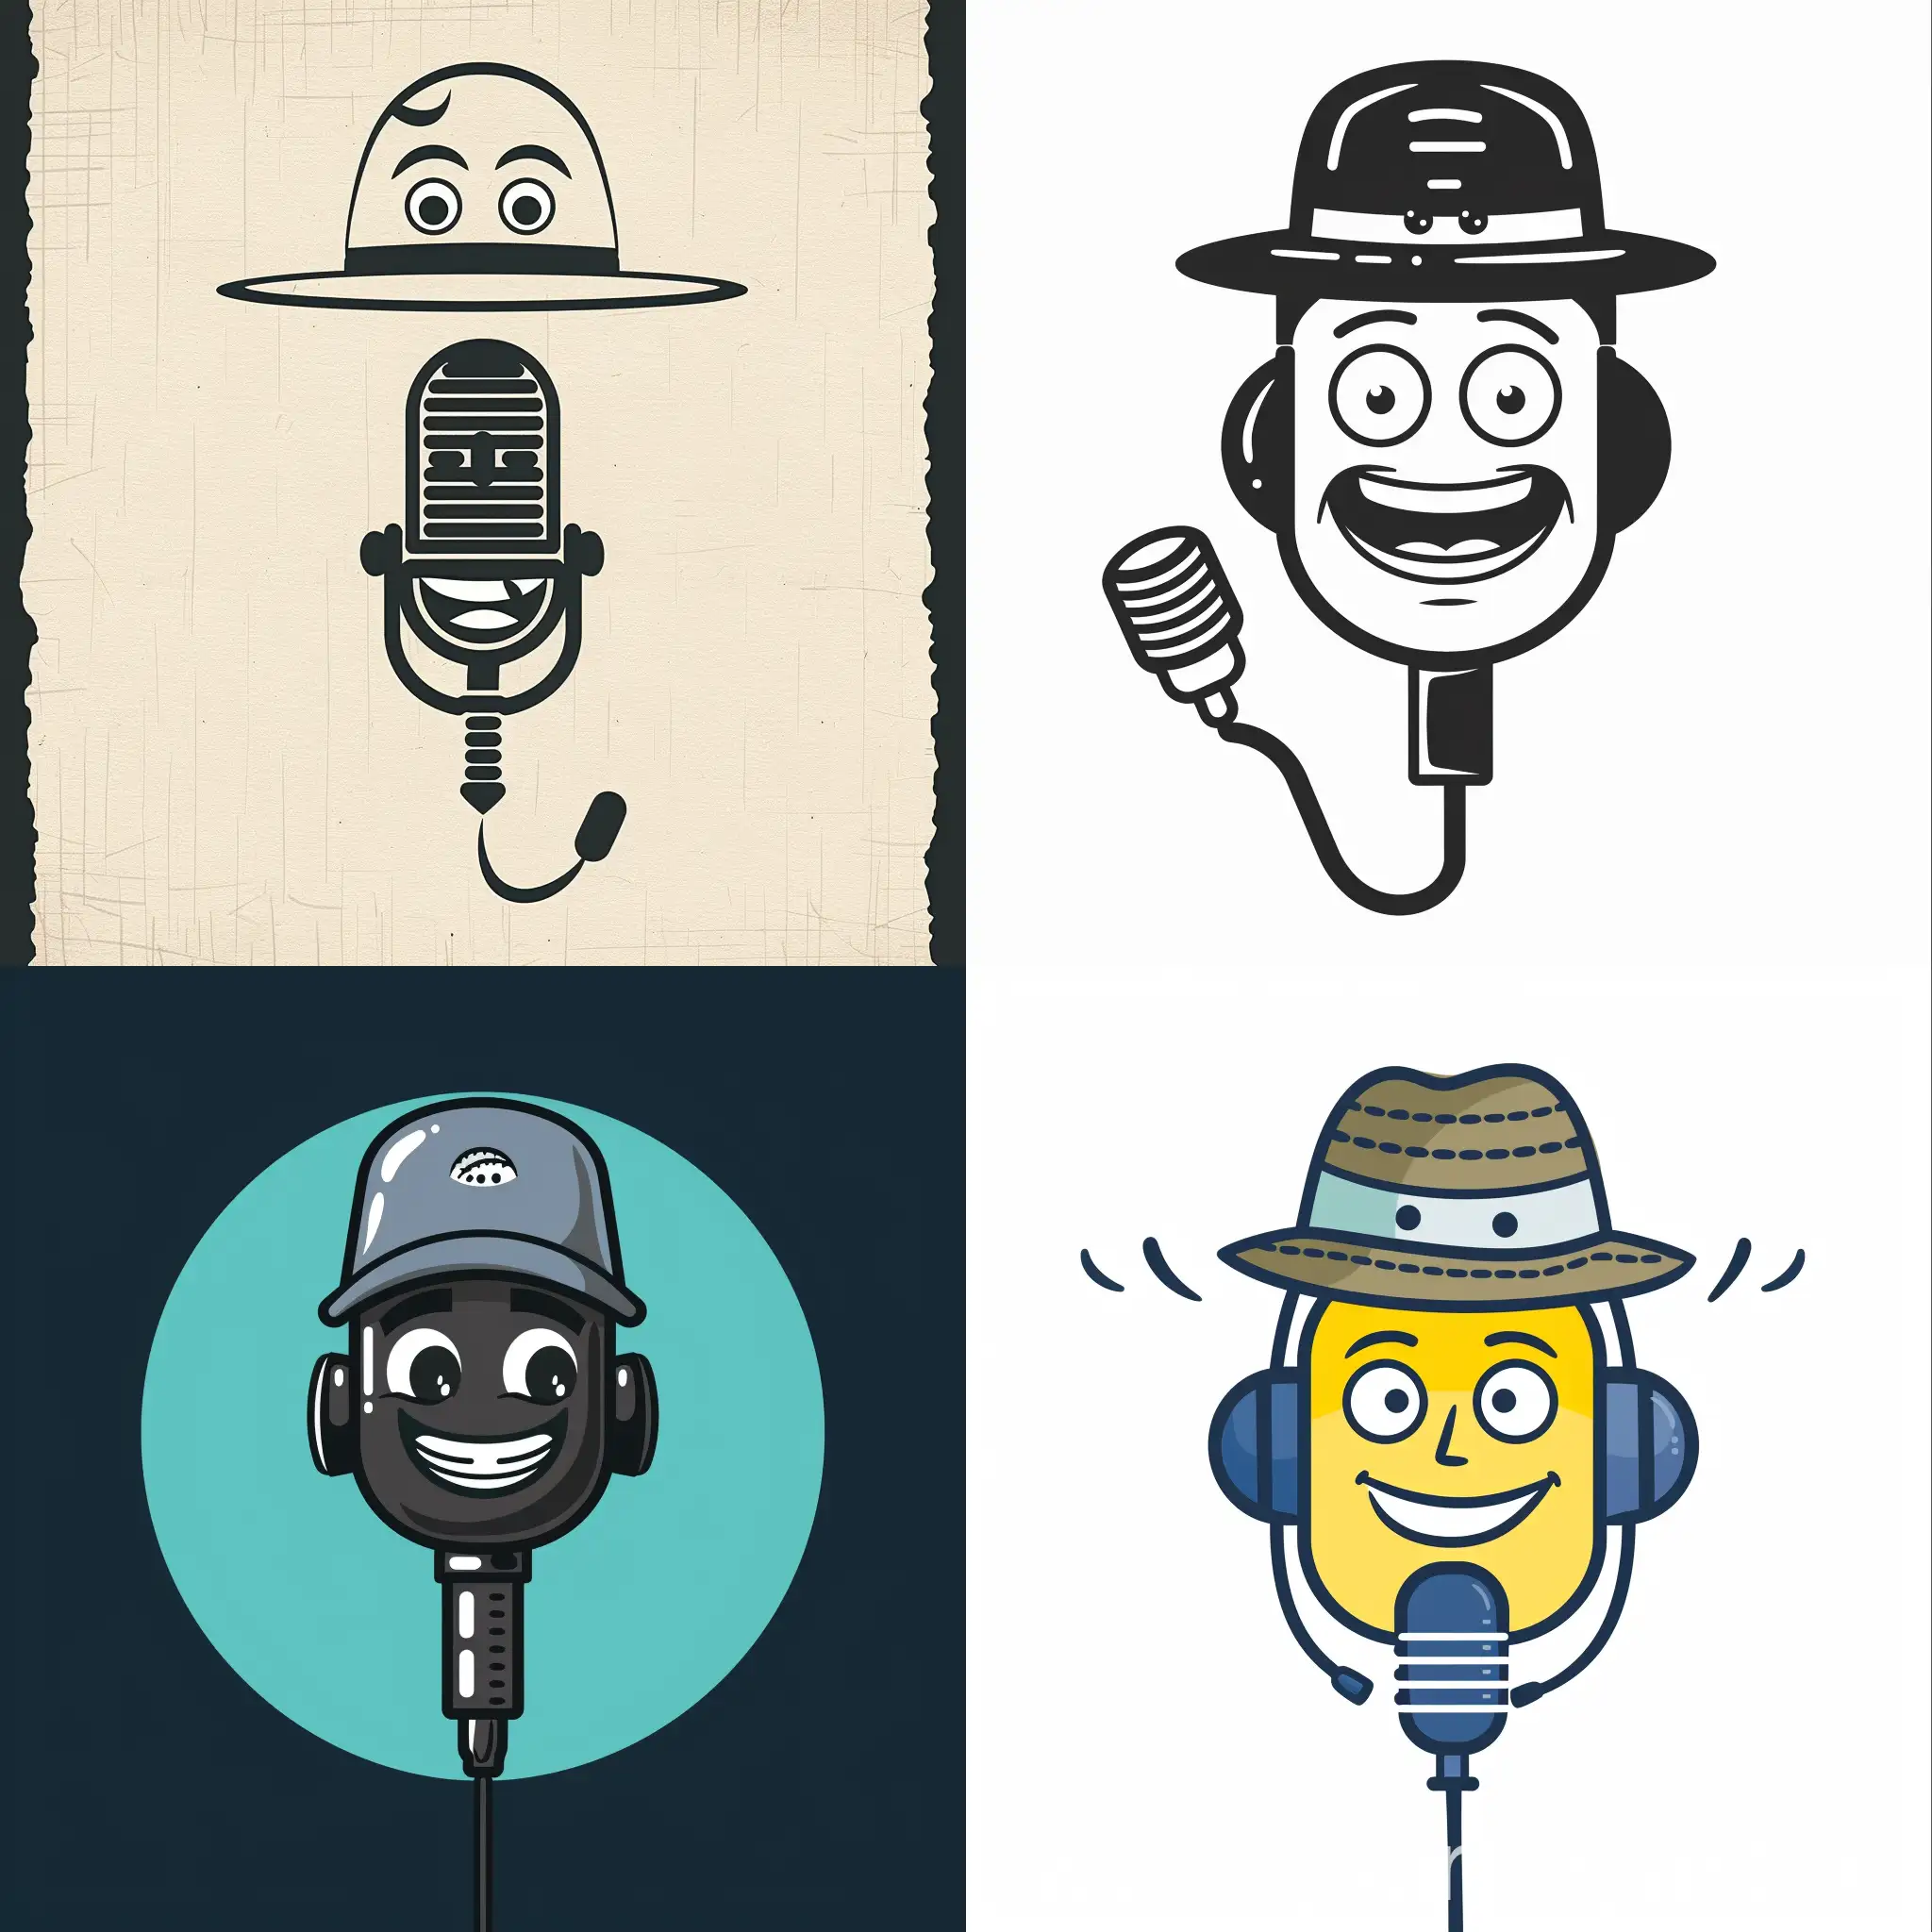 Cheerful-Podcast-Logo-Smiling-Mic-with-Hat-and-Eyes